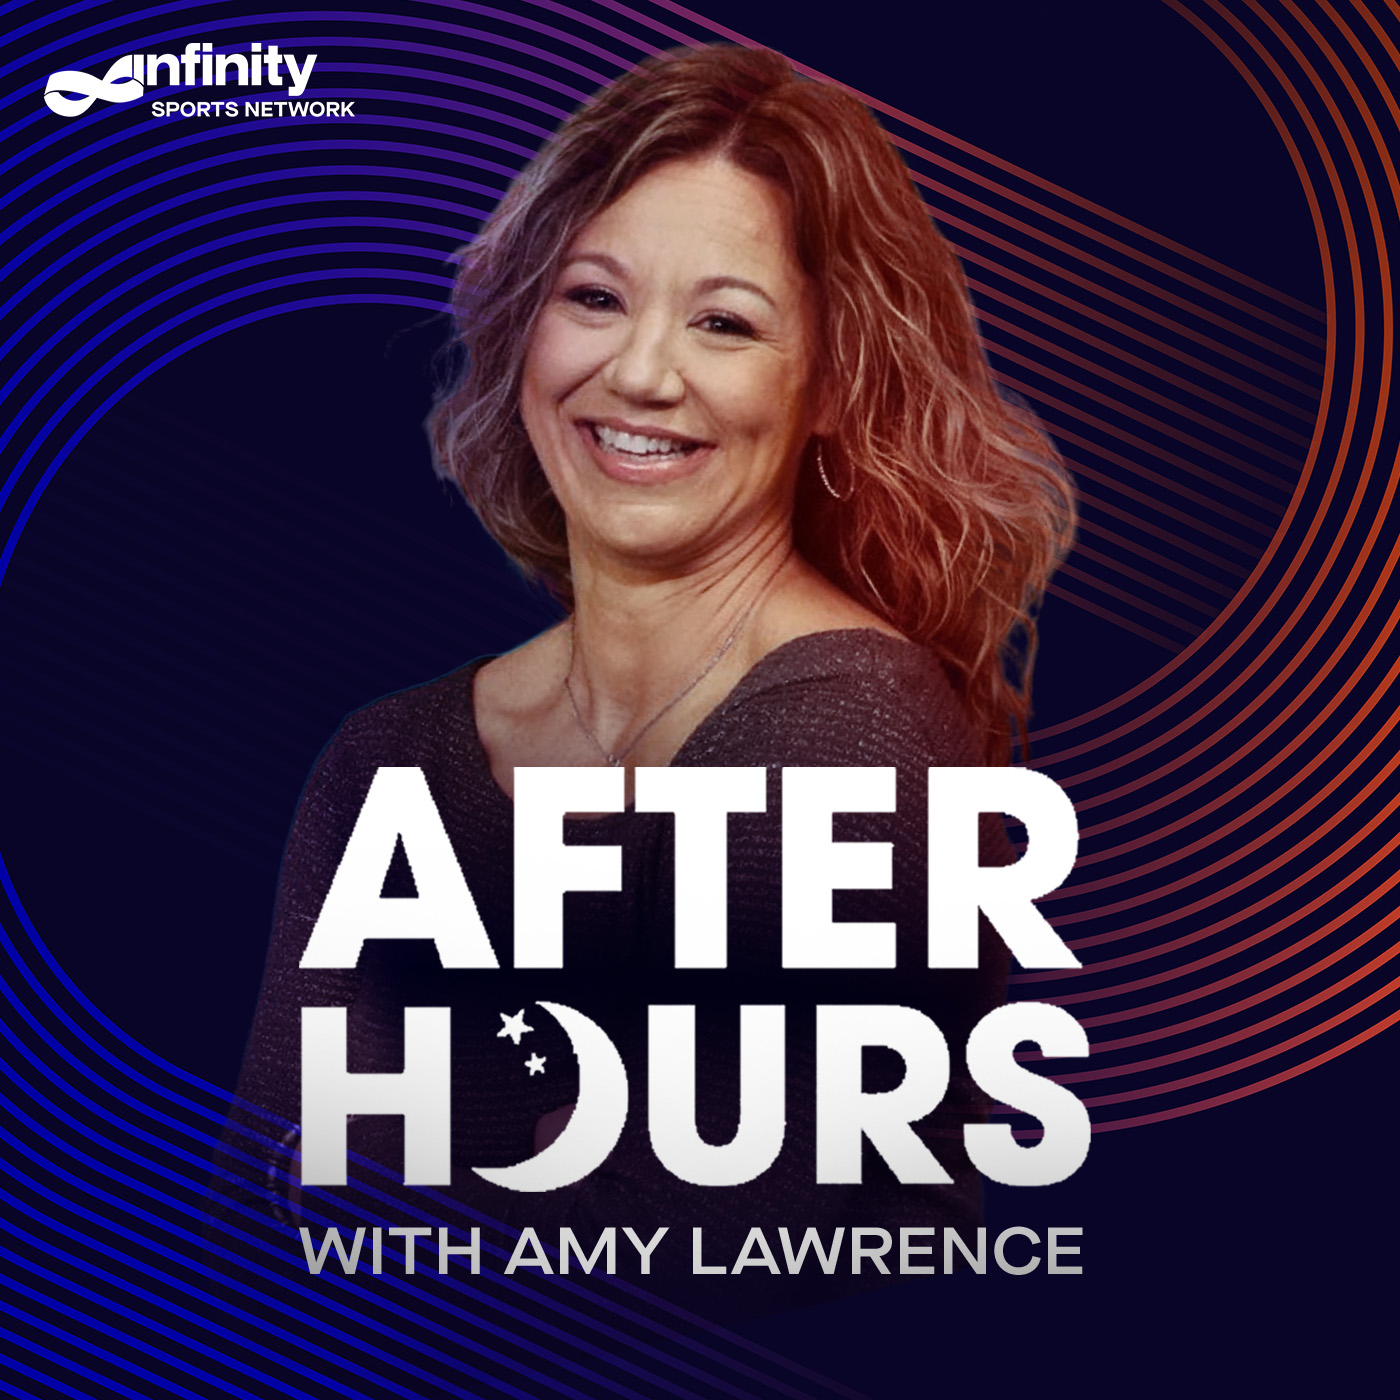 9-8-21 After Hours with Amy Lawrence PODCAST: Hour 2